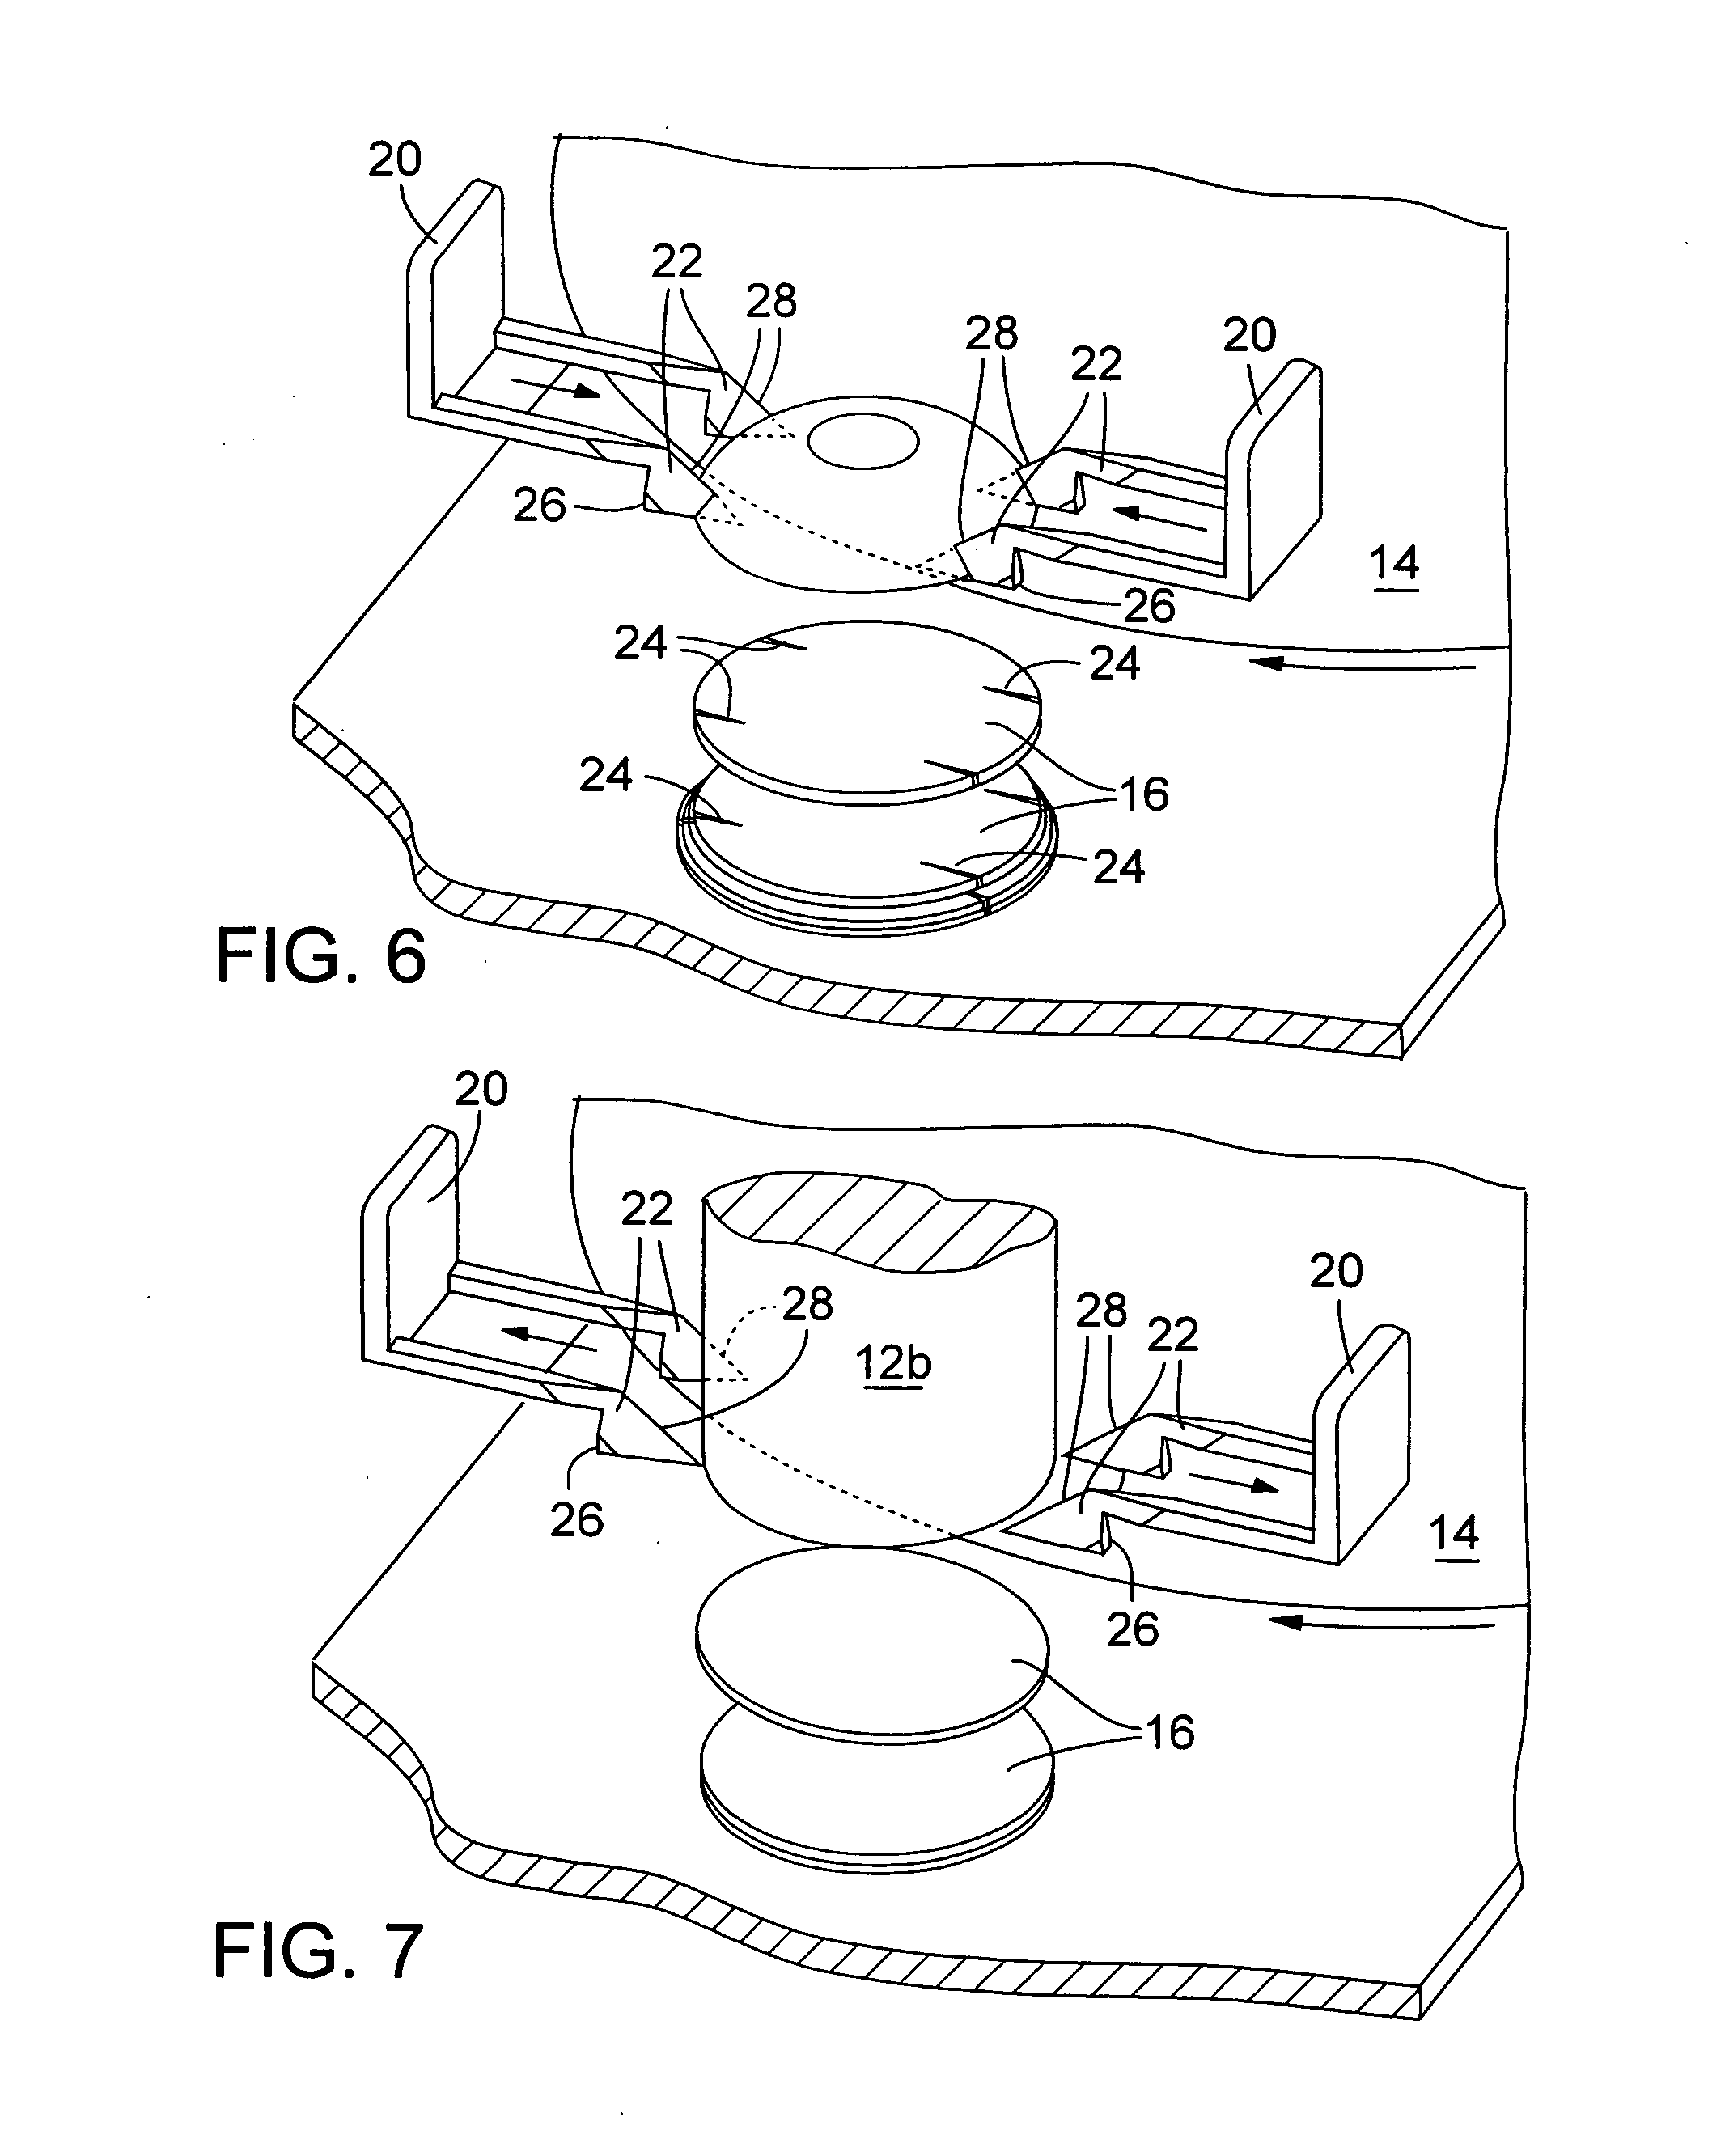 Feed mechanism for slicing machine